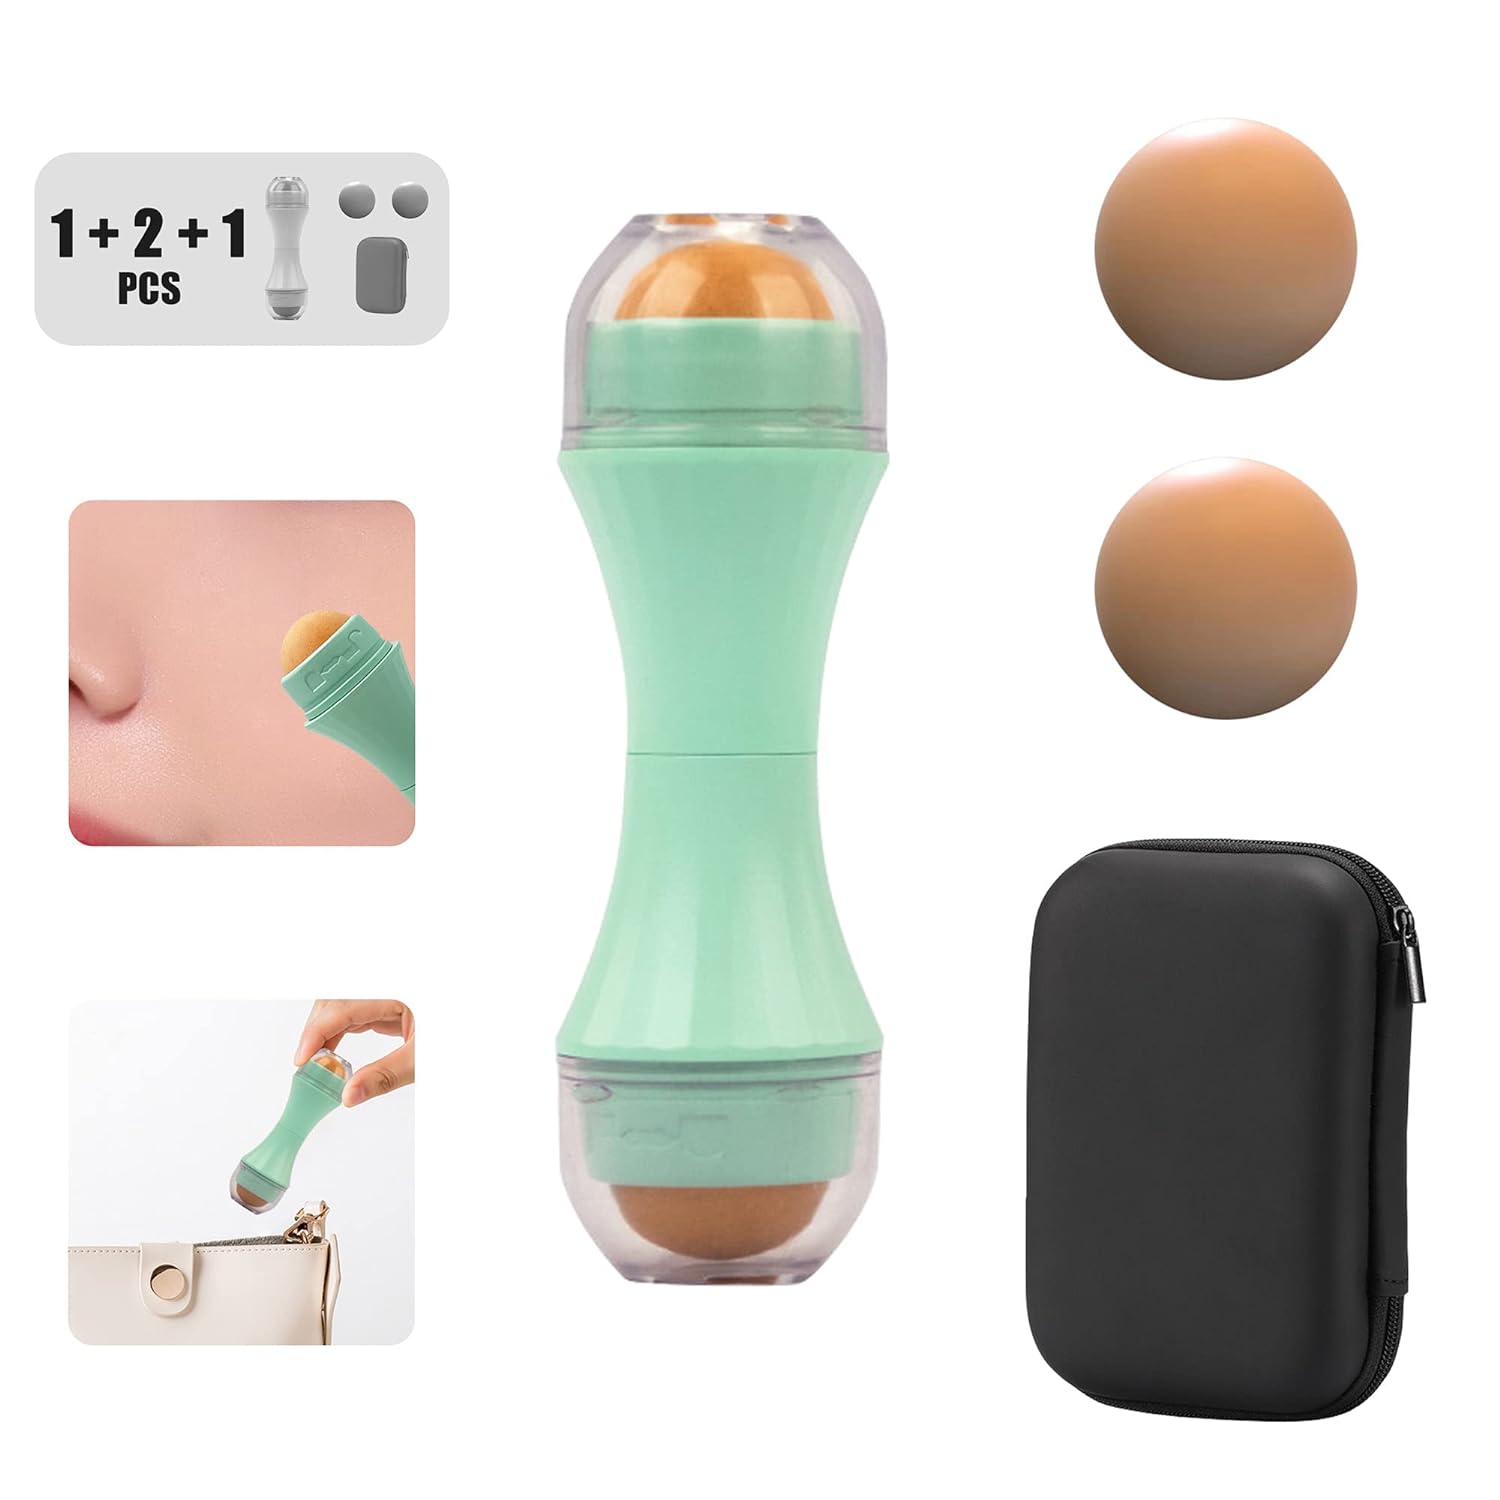 Oil Absorbing Volcanic Roller,Facial Oil Resistant Rolling Stone Ball,Face Oily Skin Control Tool,Instant Results,Remove Excess Shiny,Double-end/Reusable/Washable/Replaceable(2 Extra Balls Included)